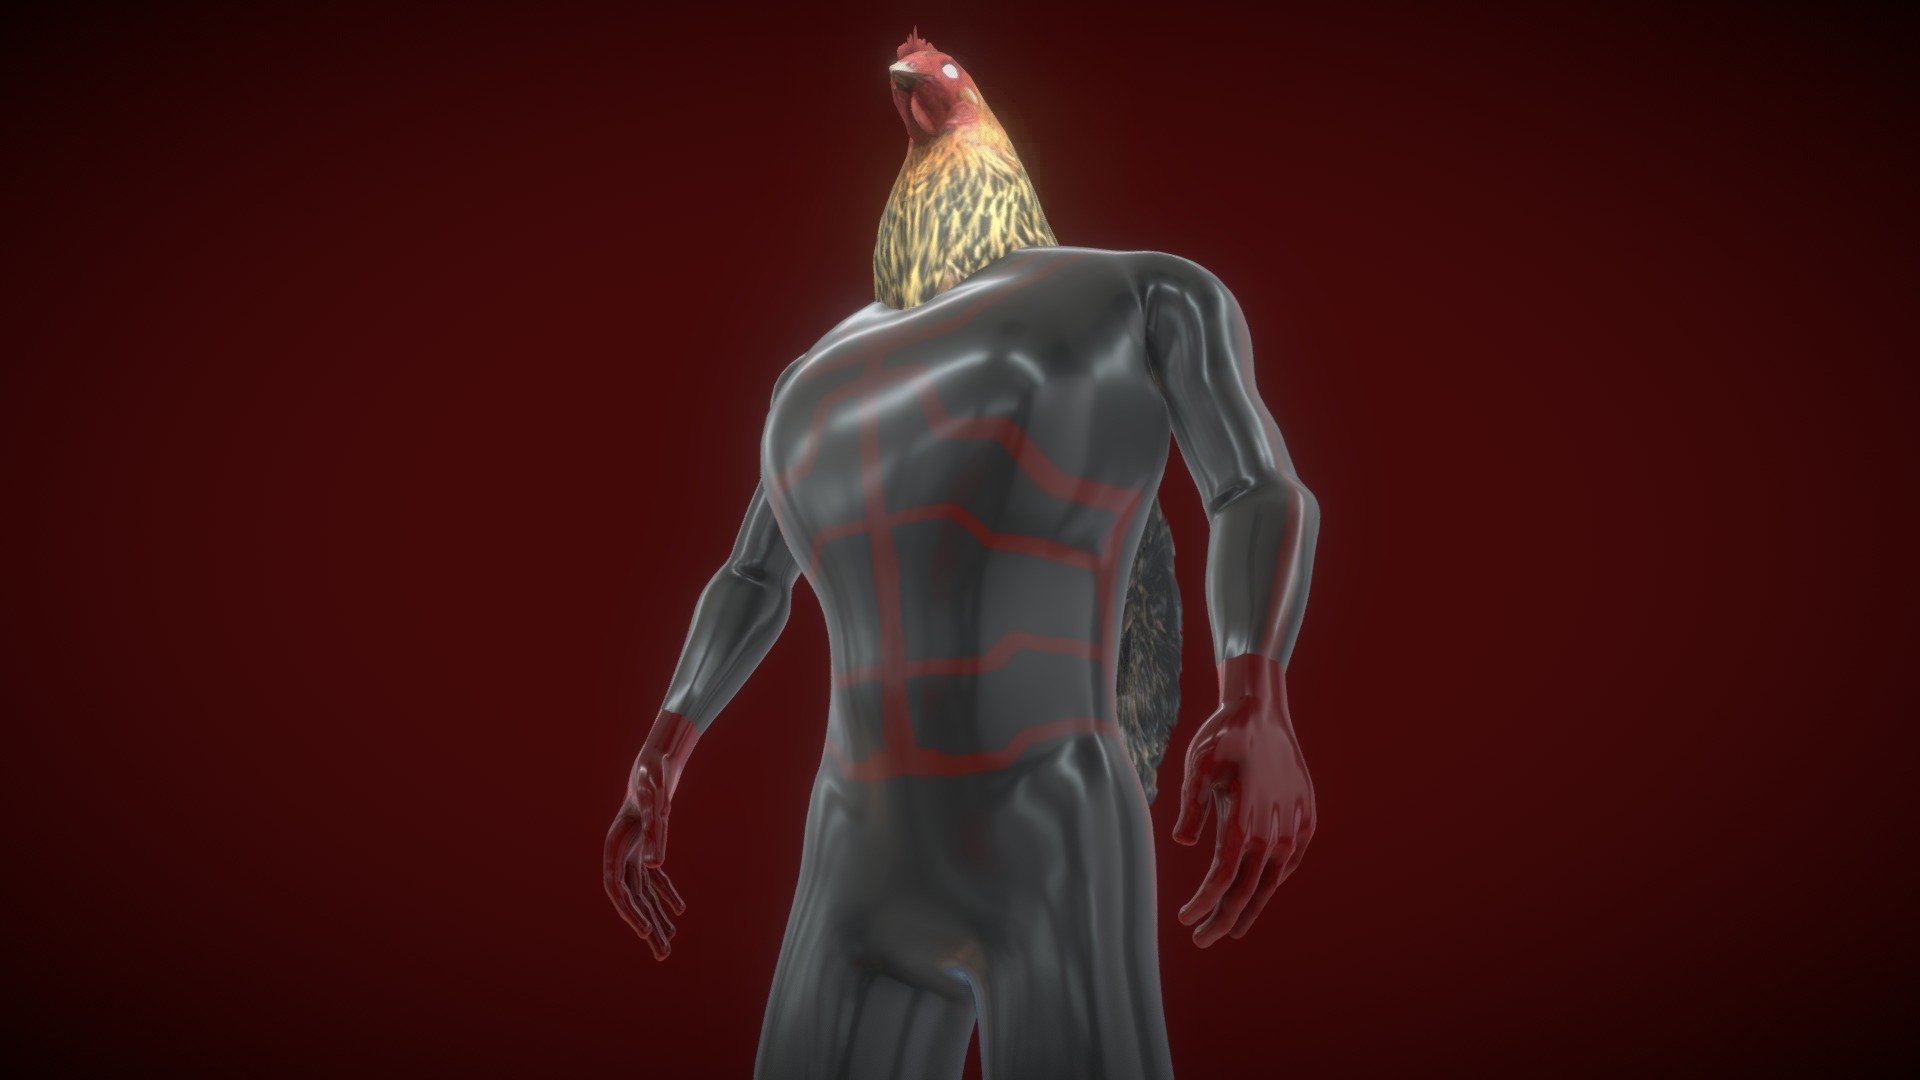 The Chicken grew stronger with each multiverse it destroyed&hellip; even at this very moment the Chicken Man continues his conquest for the multiverse&hellip;

He sure does look goofy though.

As seen in the Jake The Player: Chicken Games episode:
https://www.youtube.com/watch?v=H_Sy2MdvMq0&amp;t=126s - The Chicken Man - 3D model by megajakerake (@jacobq1004) 3d model